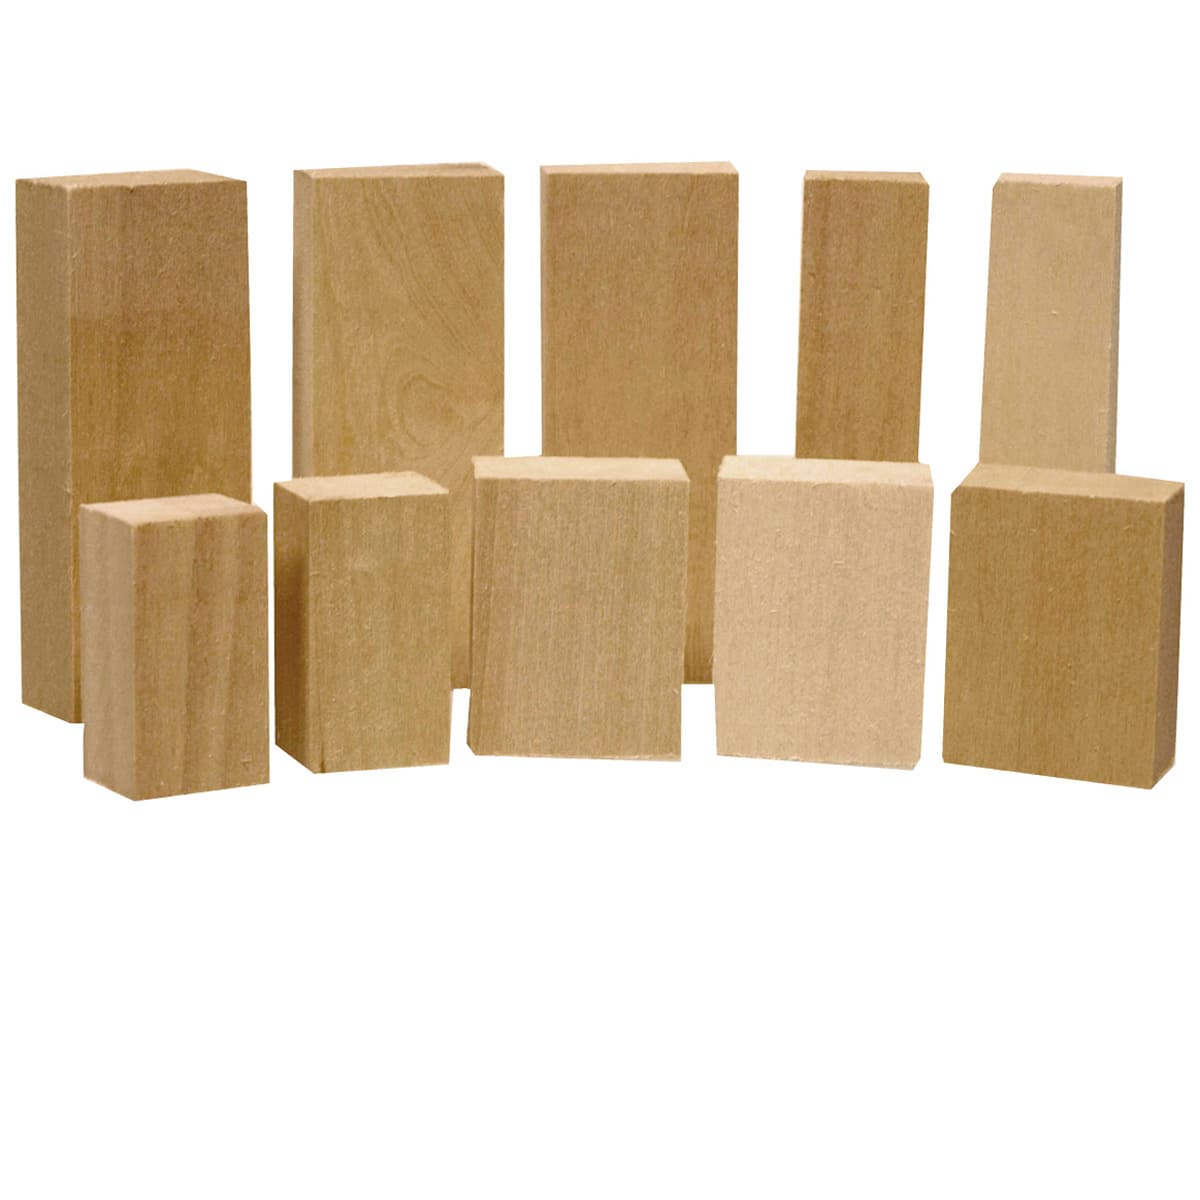 10 Pcs Wood Carving Block Carved Basswood Strips Building Blocks